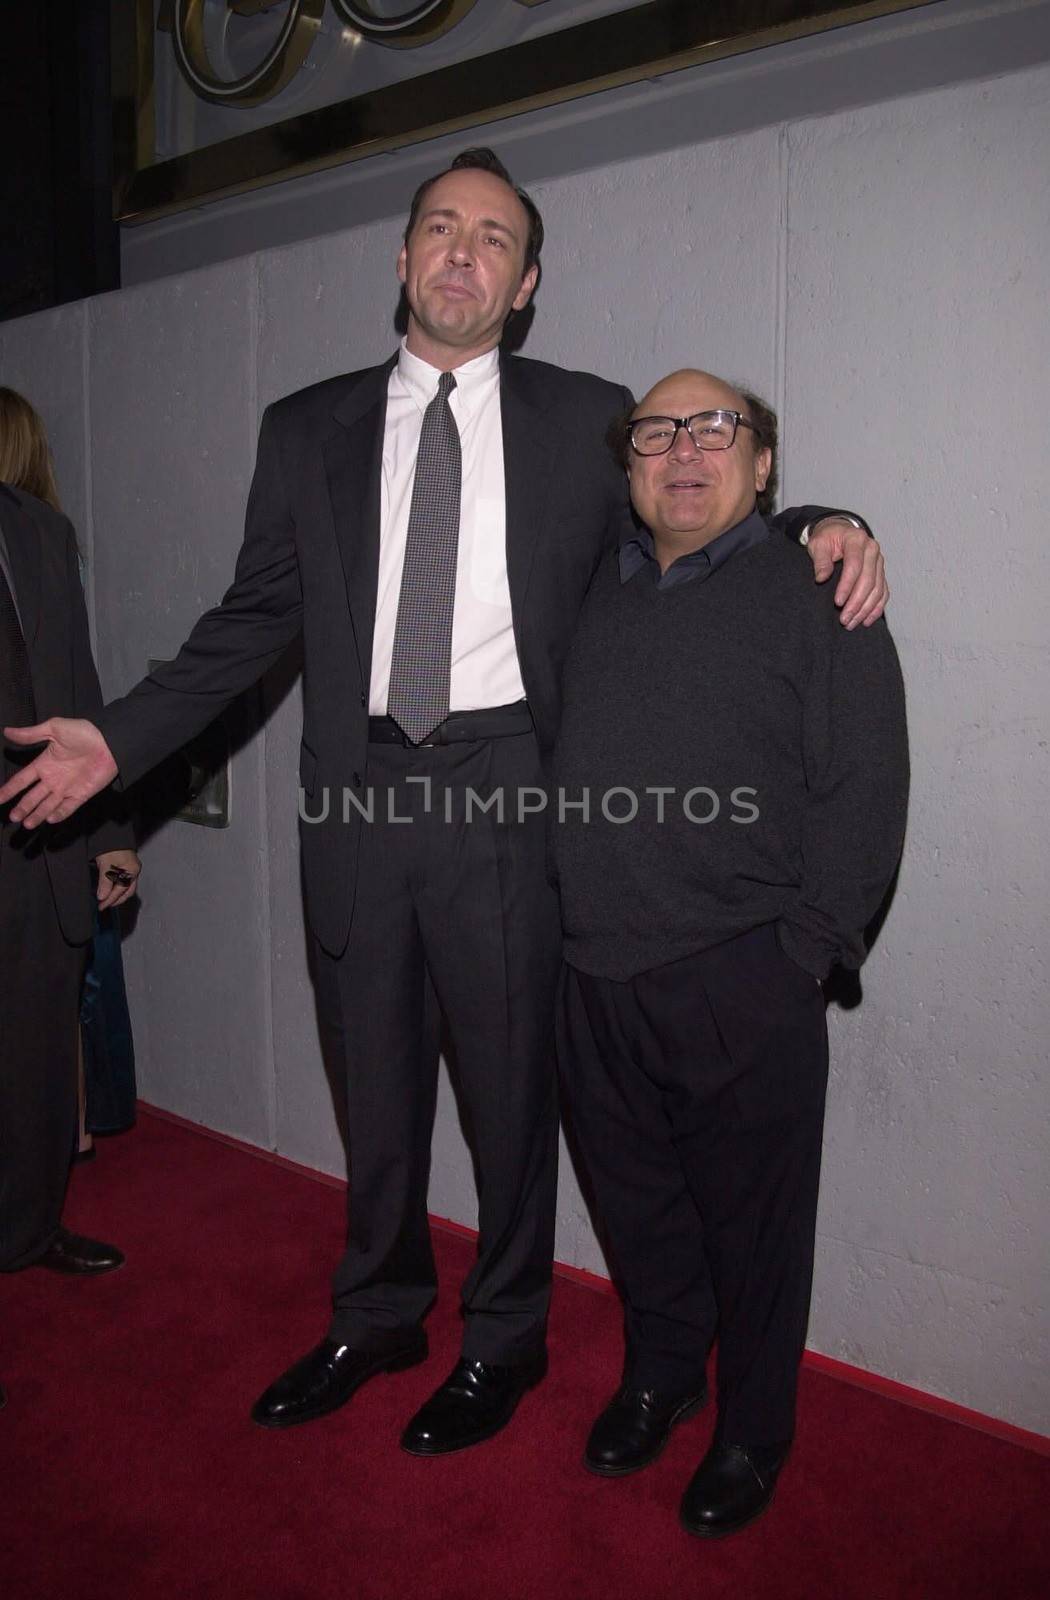 Kevin Spacey and Danny Devito at the premiere of Lions Gate Film's "THE BIG KAHUNA" in Hollywood, 04-26-00